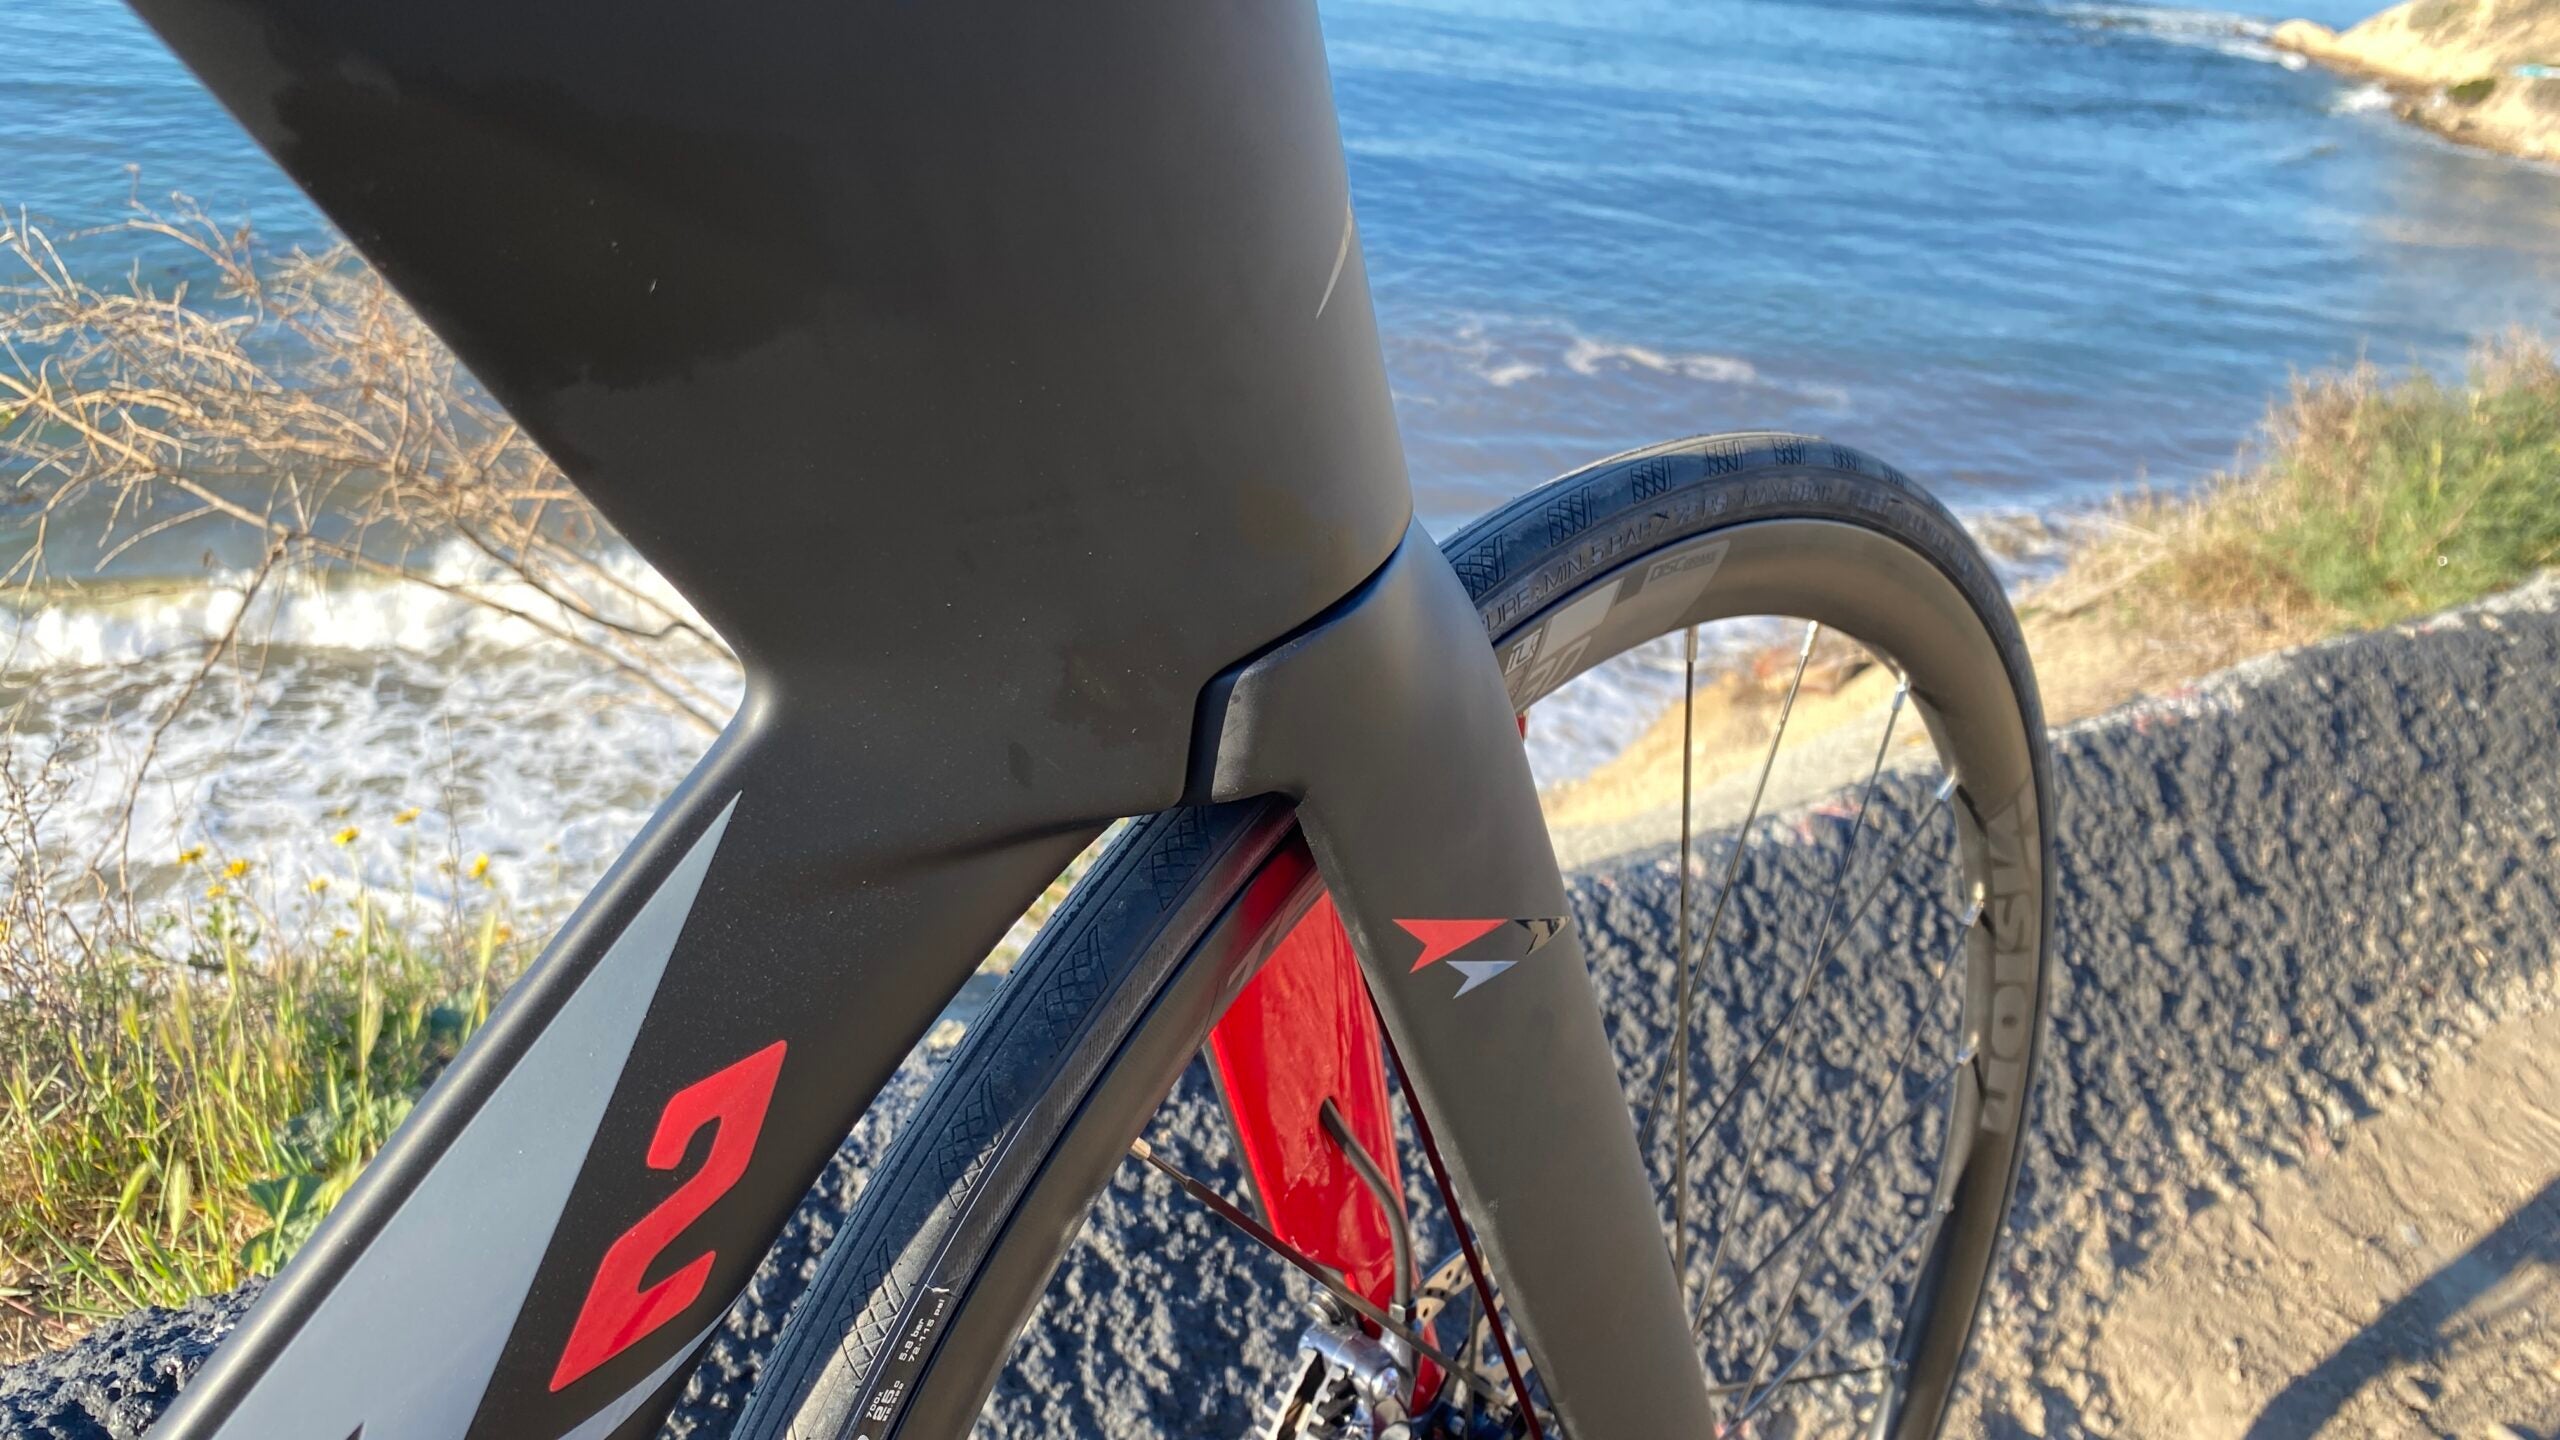 The A2 SP1.2 reviewed head tube